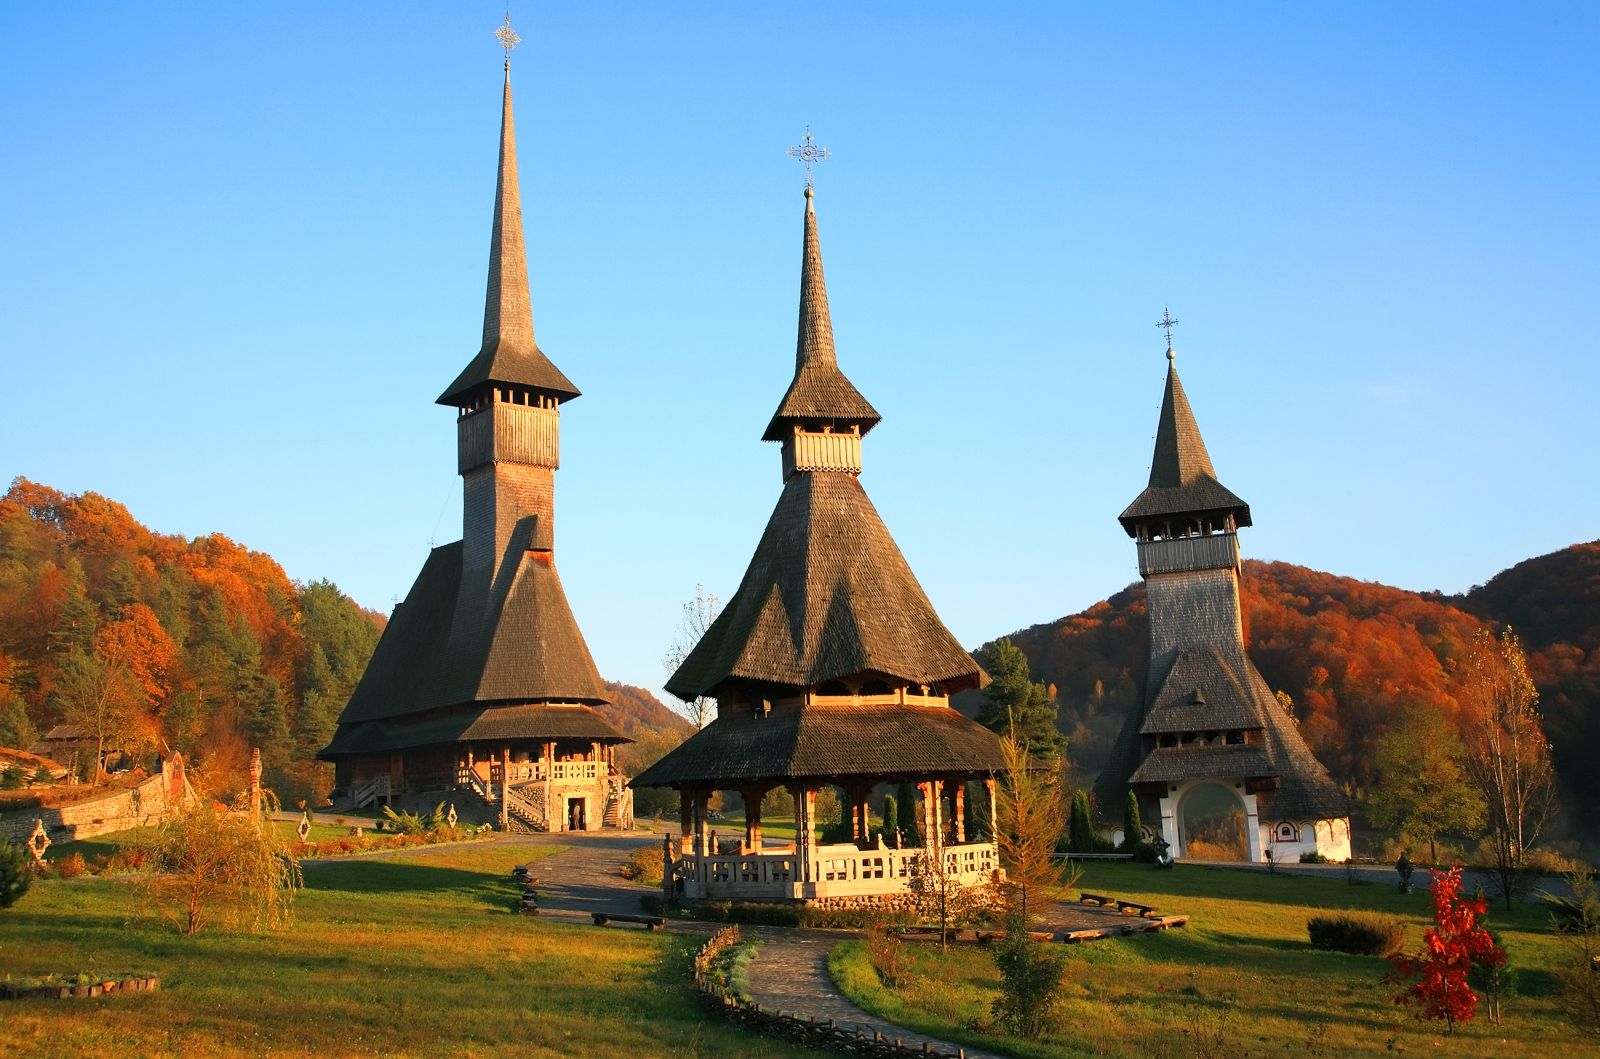 Traditional wooden churches in the Maramures region of Romania